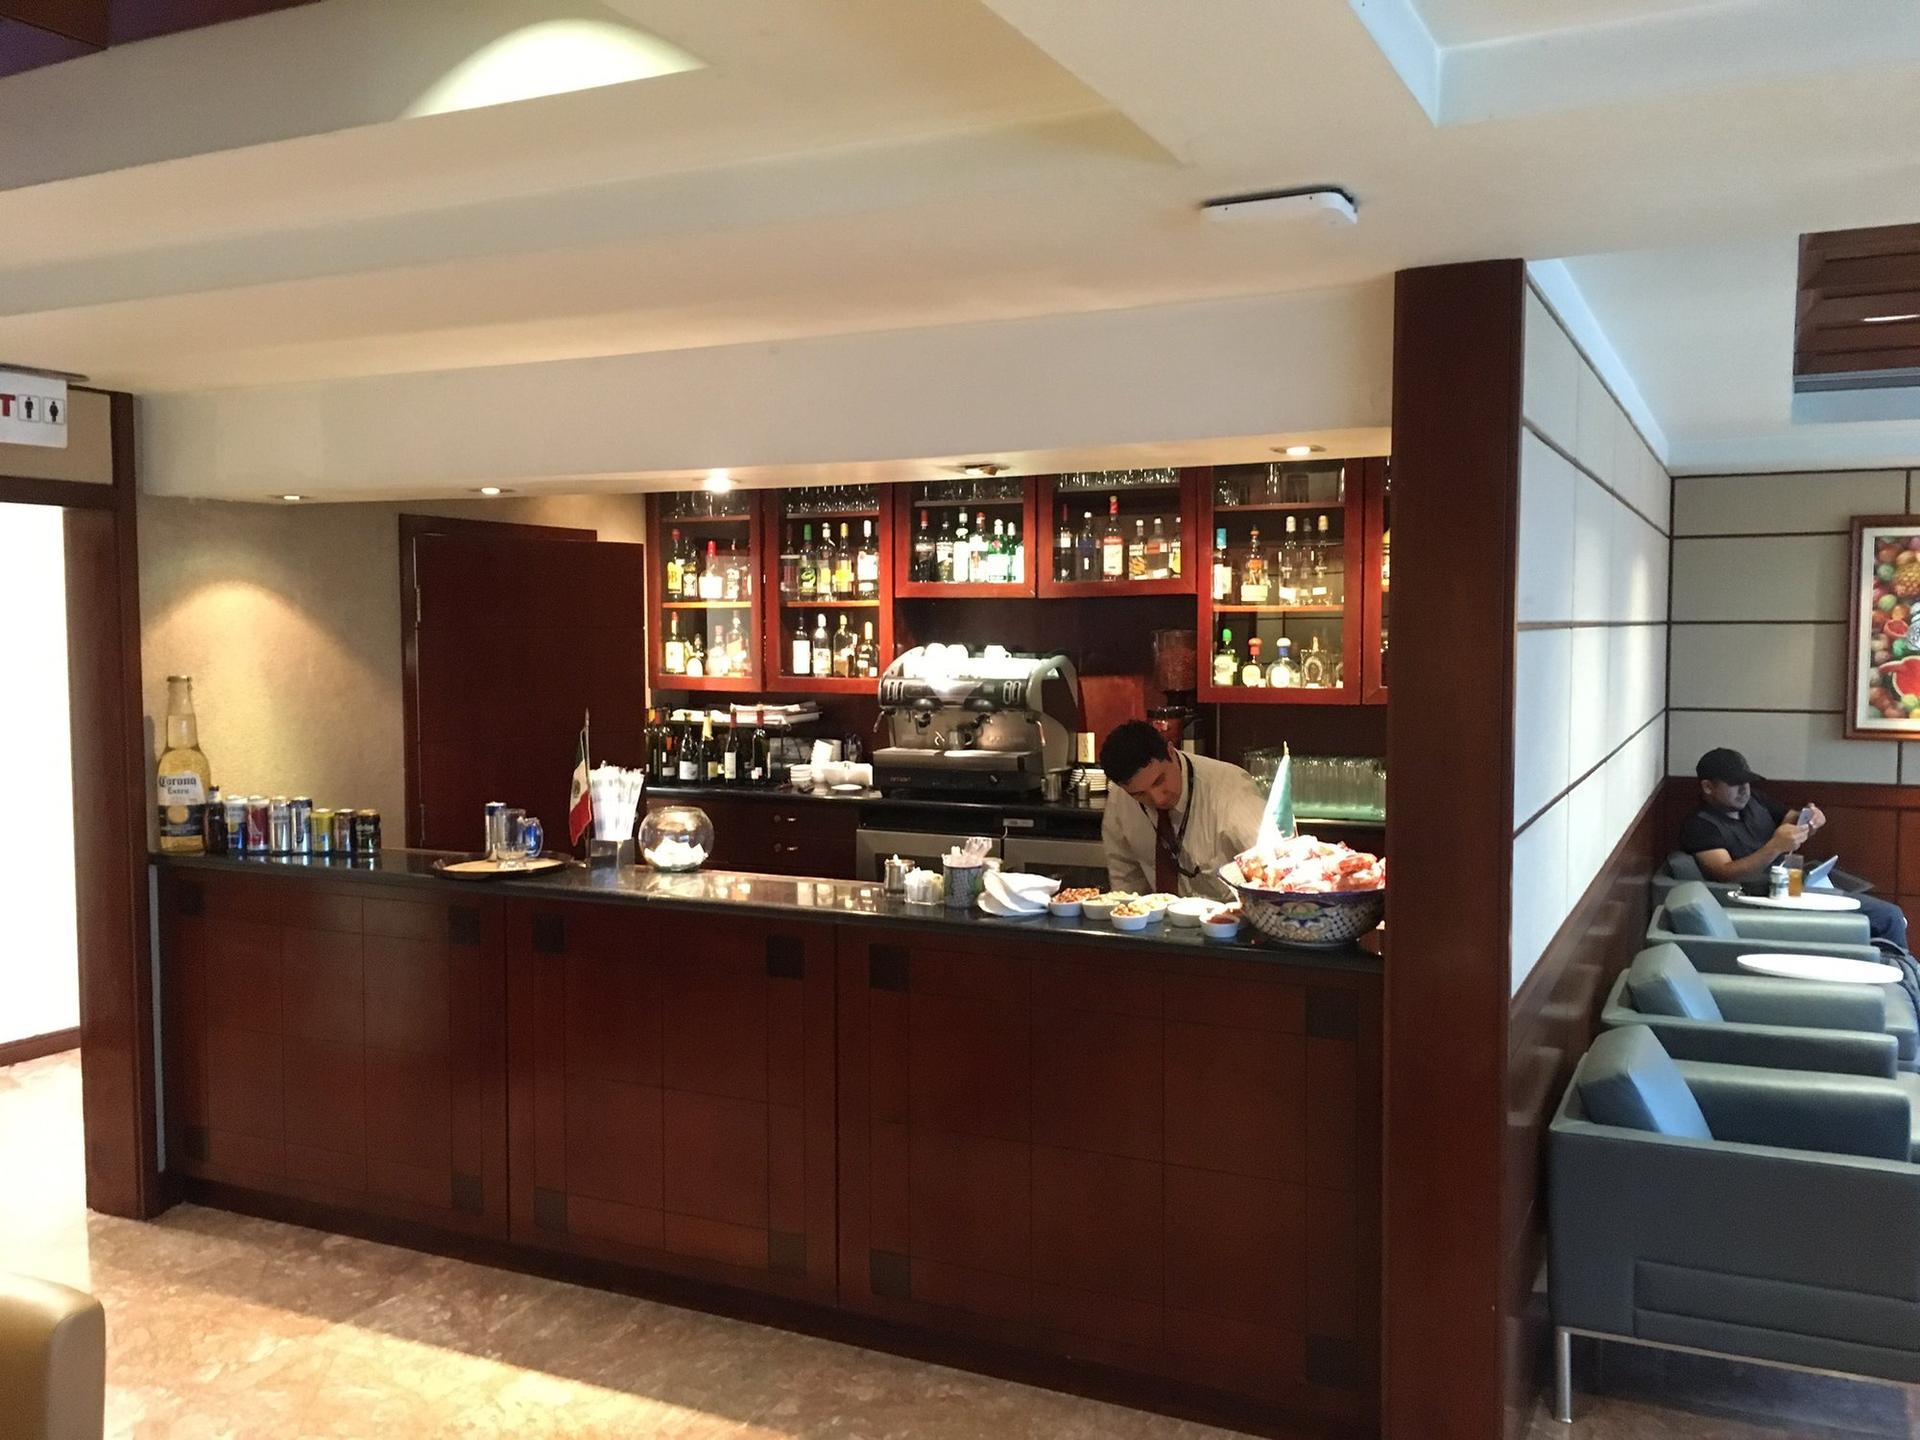 American Airlines Admirals Club image 10 of 32